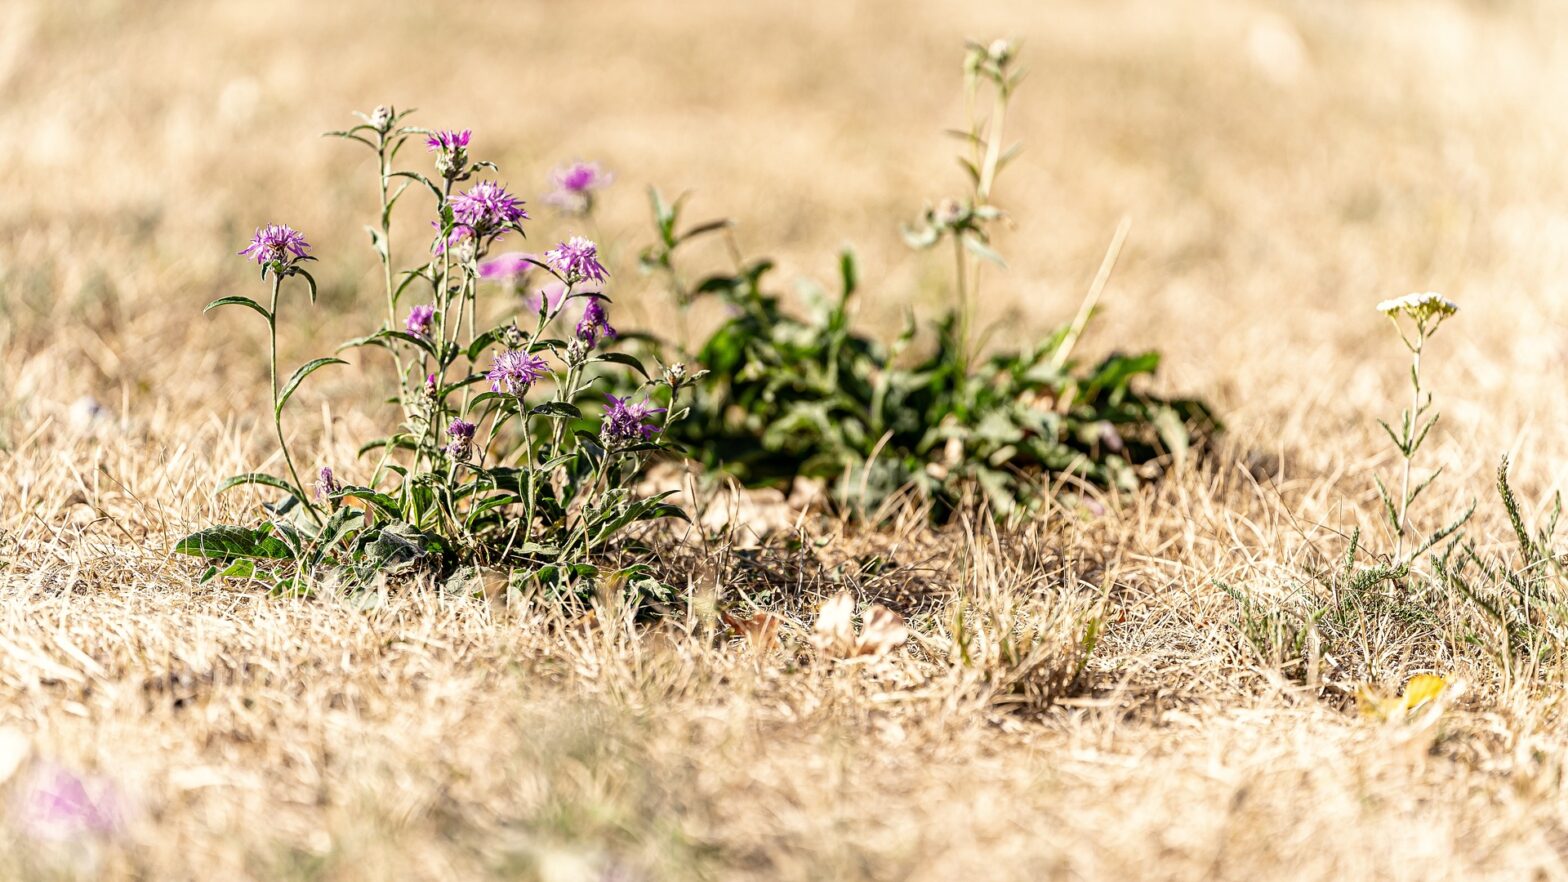 Image by Schorsch from Pixabay, wild flowers surviving surrounded by dried, brown vegetation